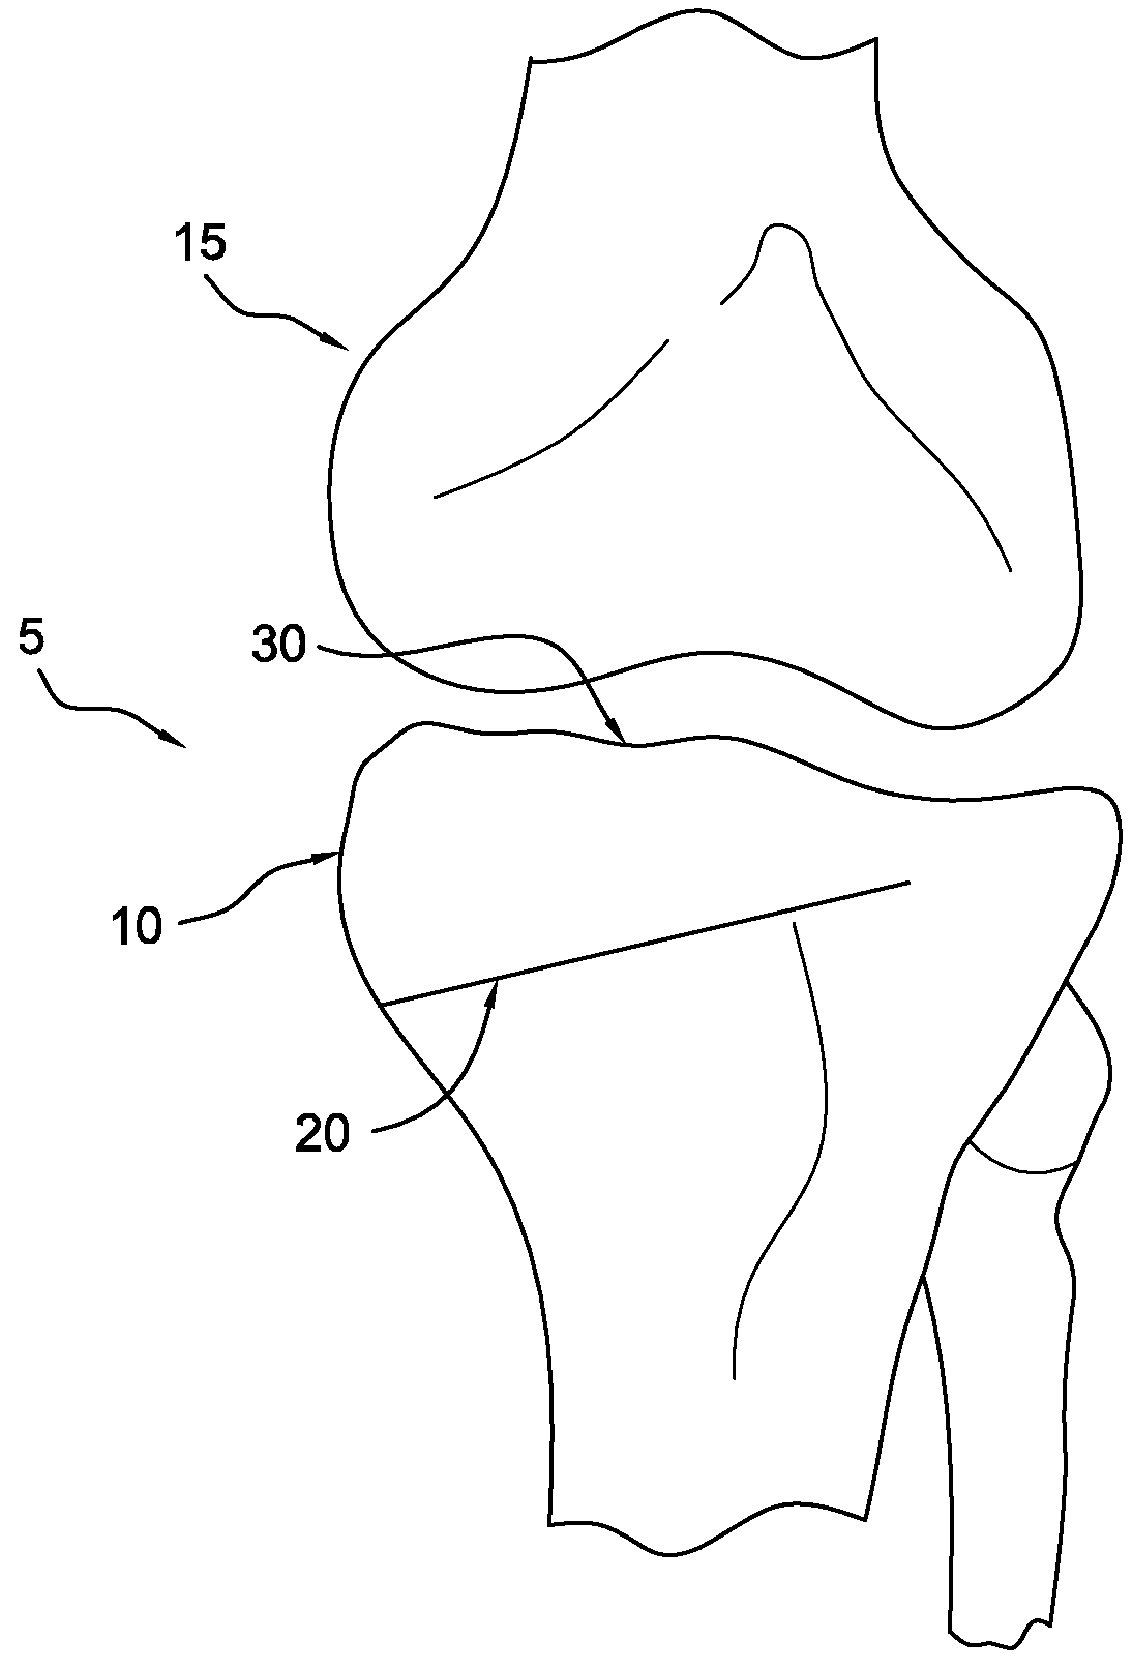 Method and apparatus for reconstructing a ligament and/or repairing cartilage, and for performing an open wedge, high tibial osteotomy